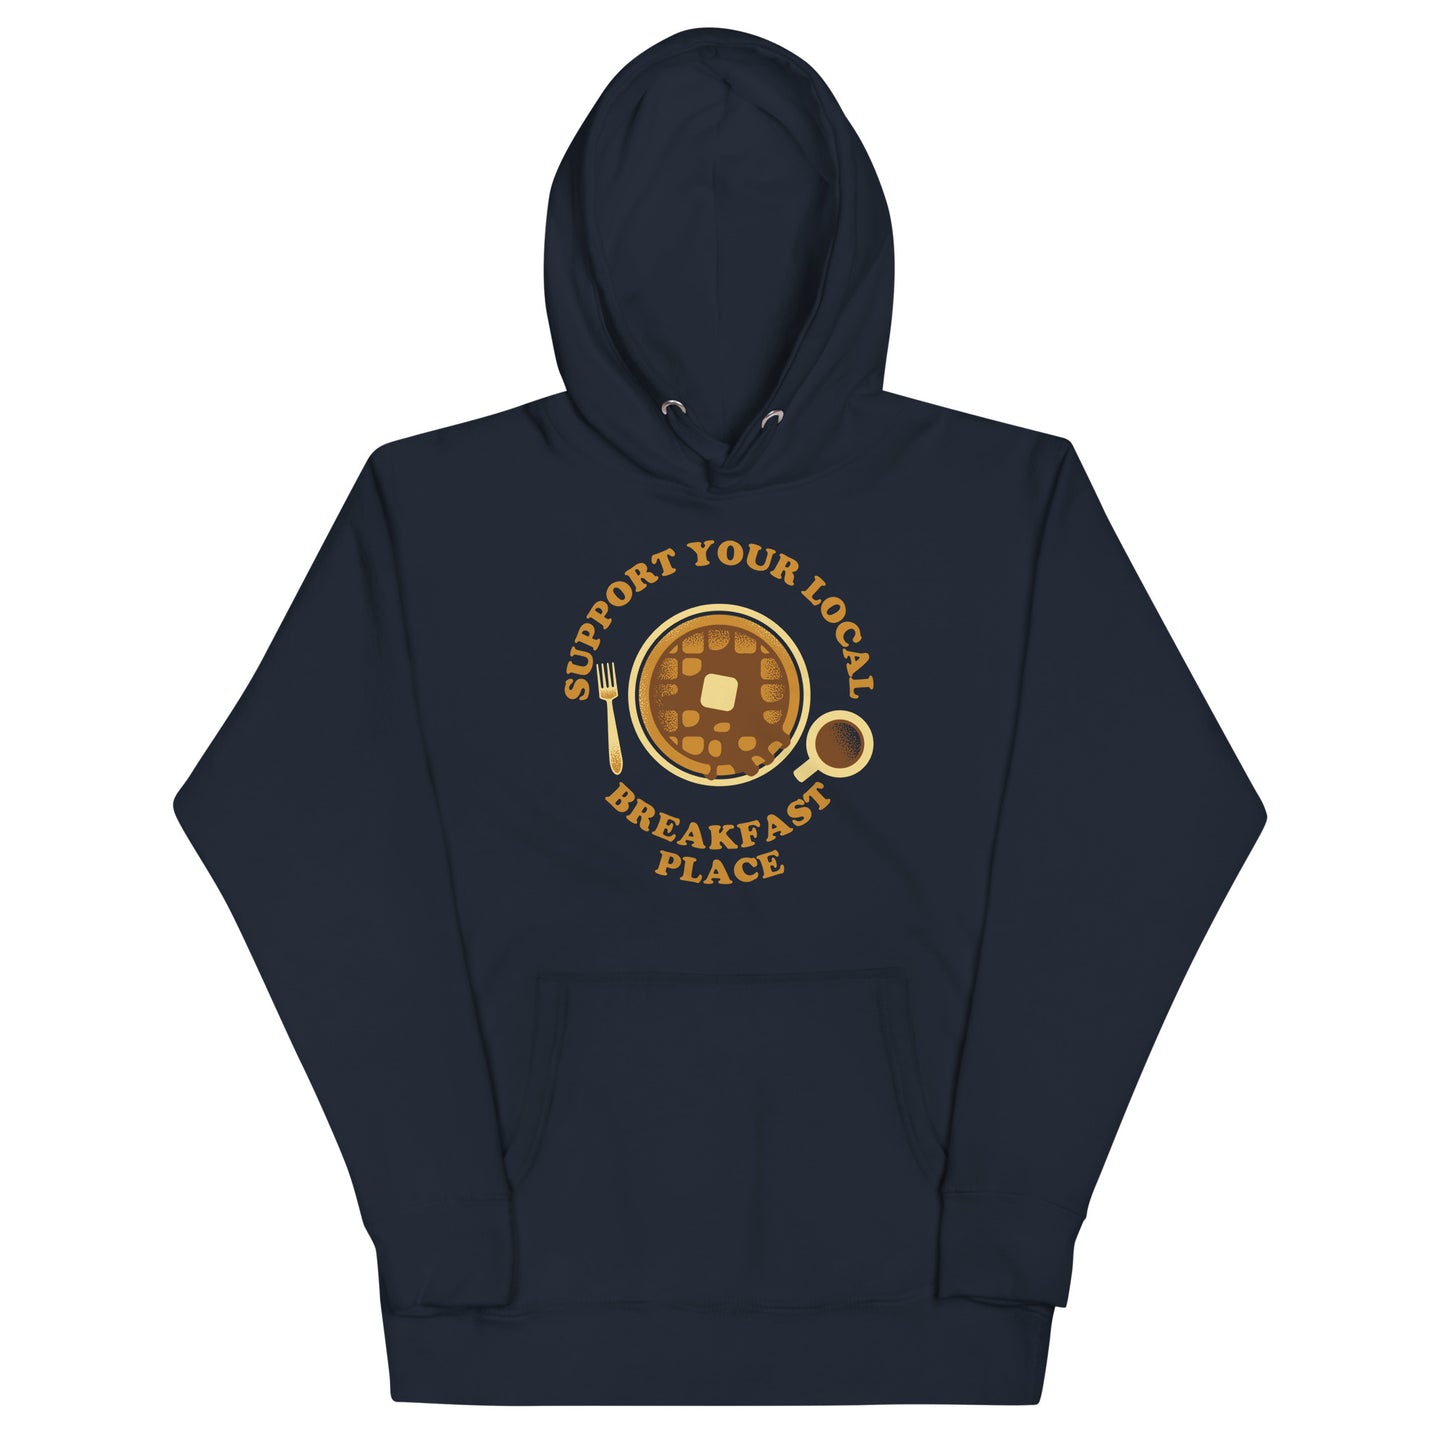 Support Your Local Breakfast Place Unisex Hoodie